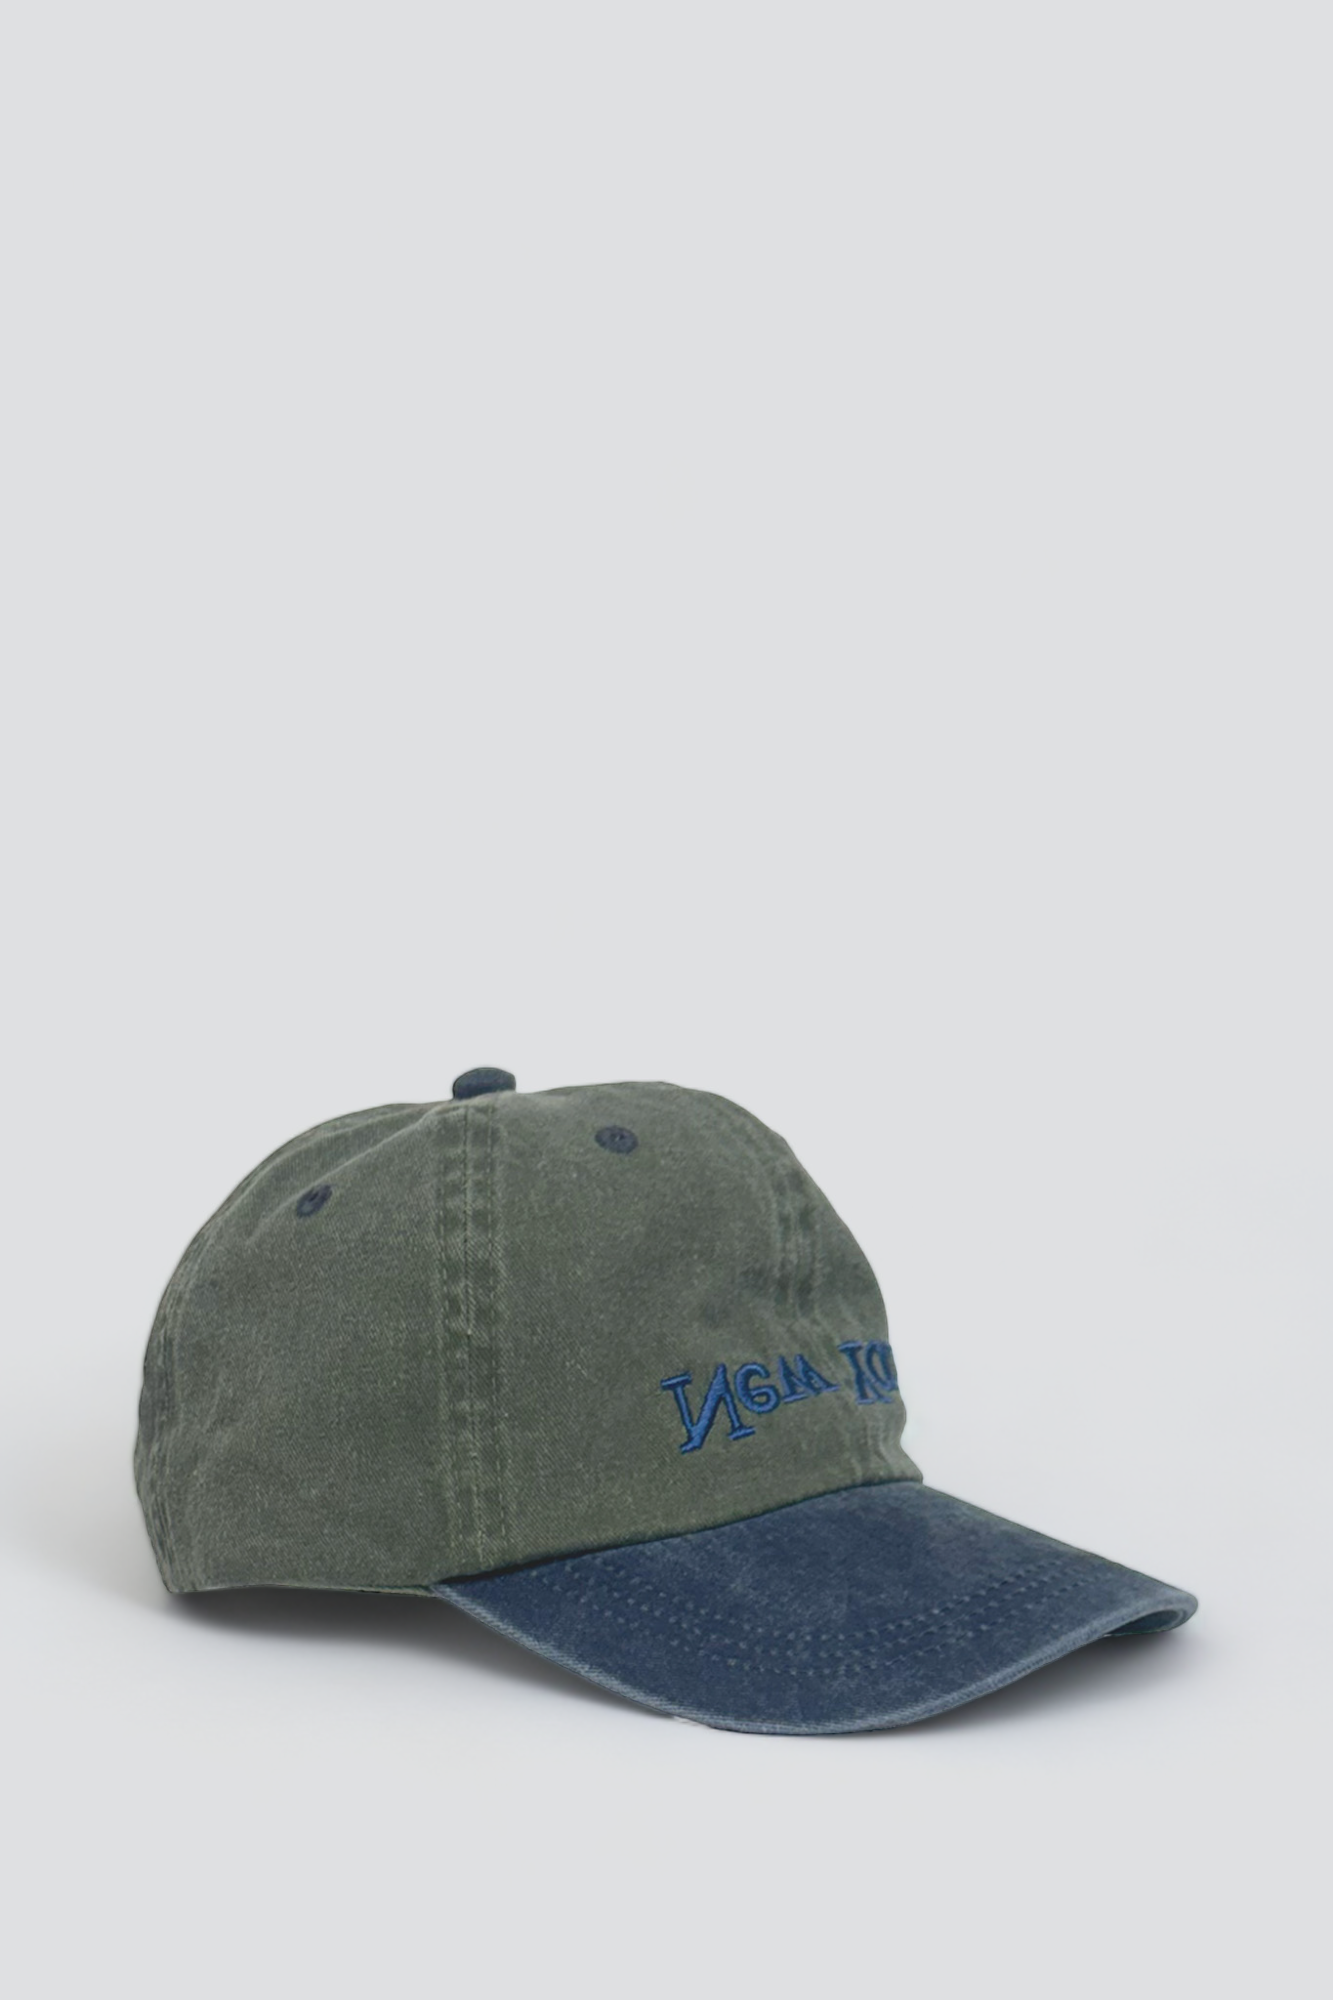 New York Embroidered Hat - Olive/Navy